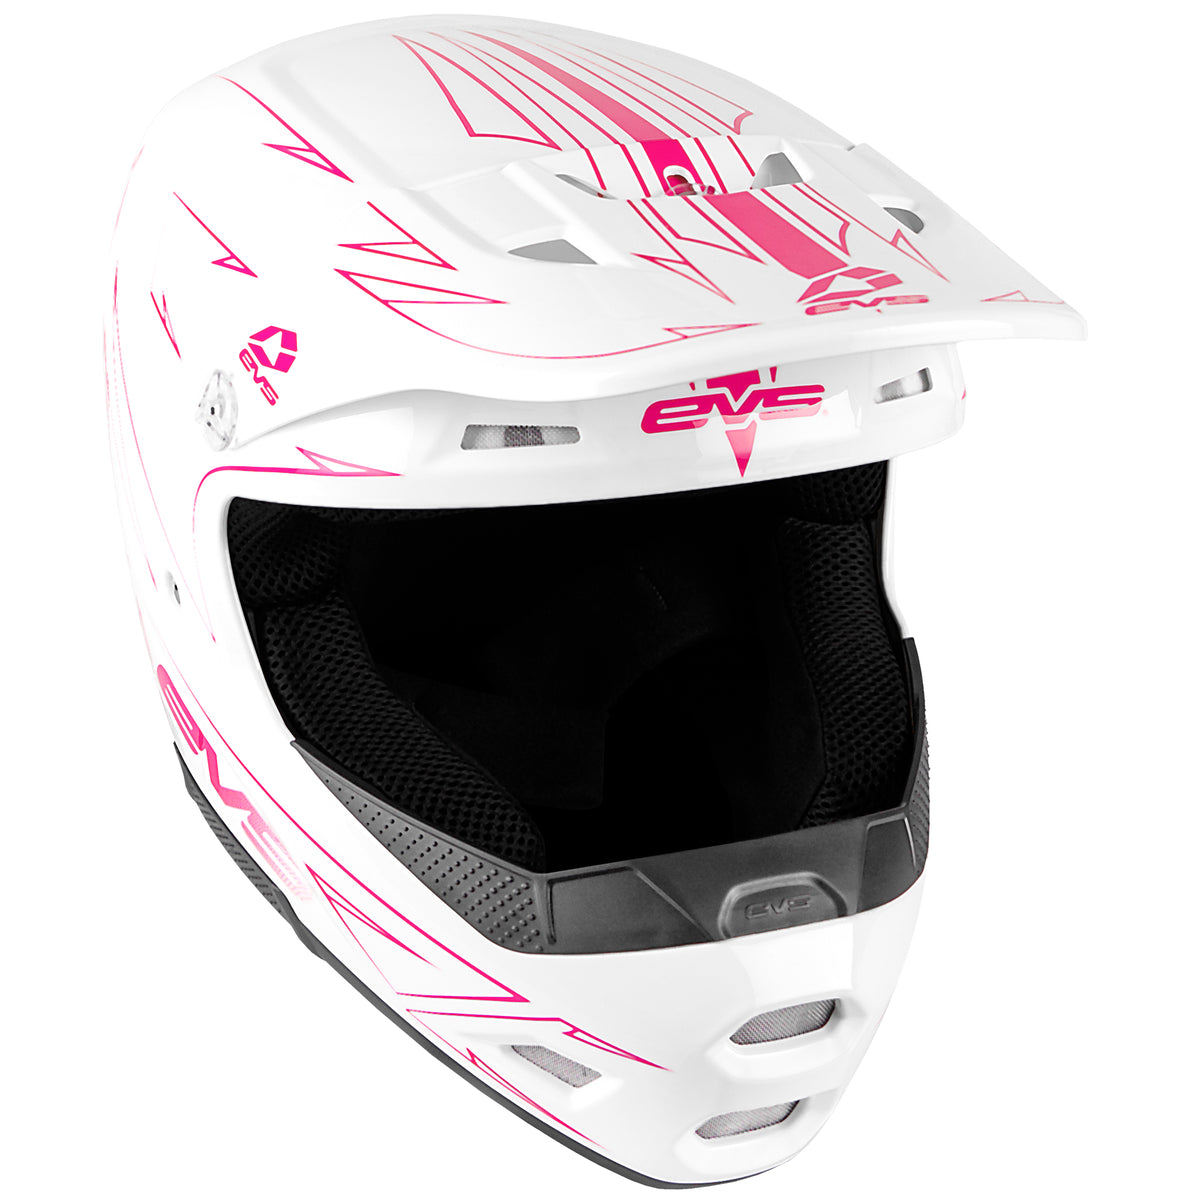 T3 Youth Helmet - 50/Fifty Pink - EVS Sports